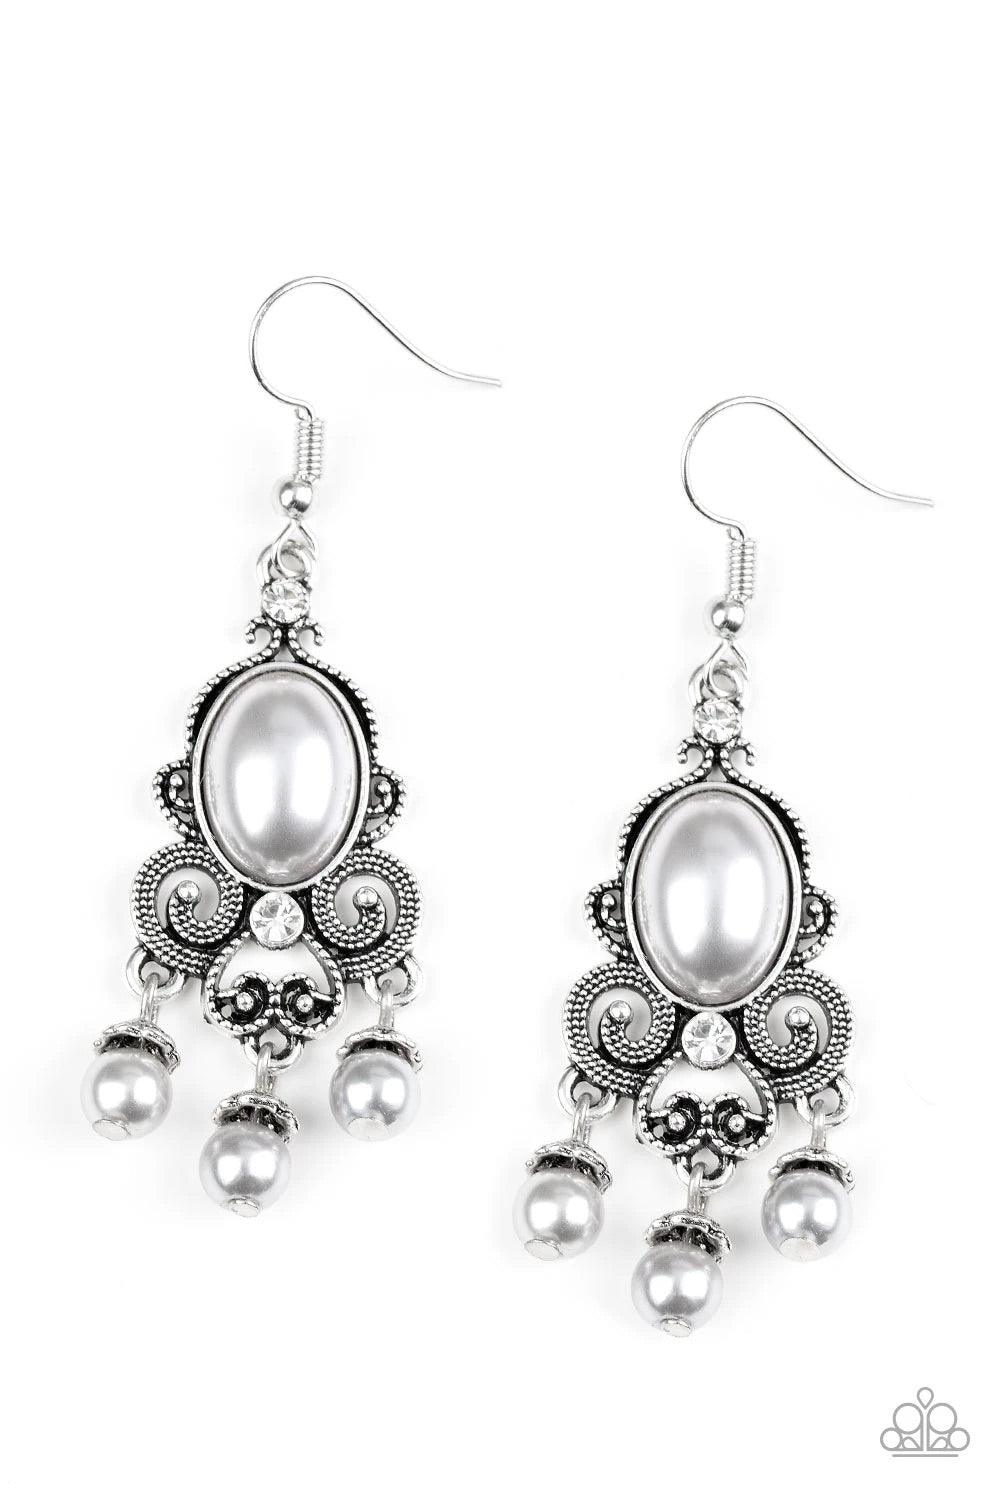 Paparazzi Accessories I Better Get GLOWING - Silver Dotted silver filigree spins around a pearly silver bead and dainty white rhinestones, coalescing into a regal frame. A pearly fringe swings from the bottom of the frame for a refined finish. Earring att